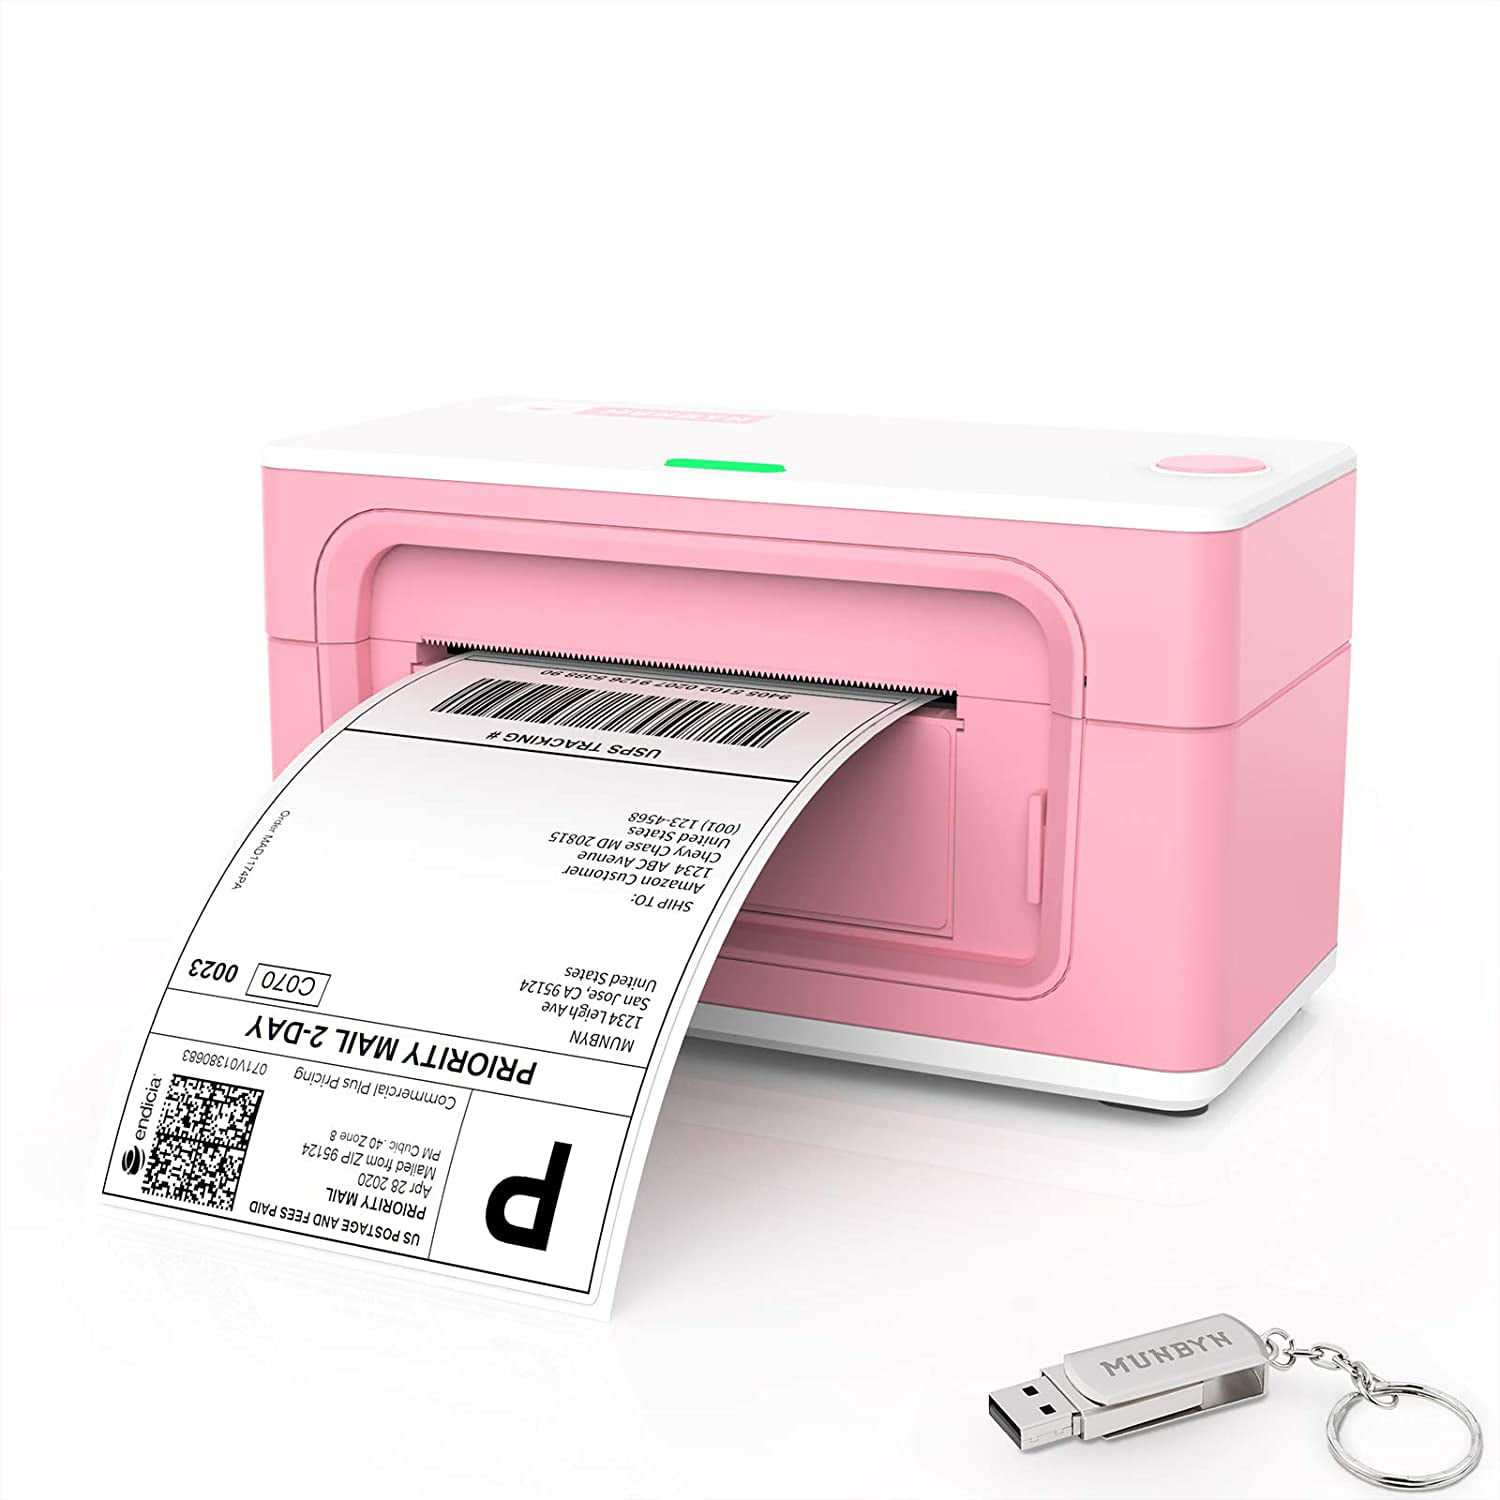 Shipping Label Printer, MUNBYN USB Pink Label Printer Maker for Shipping  Packages Labels 4x6 Thermal Printer for Home Business,Amazon,Etsy,Ebay, 